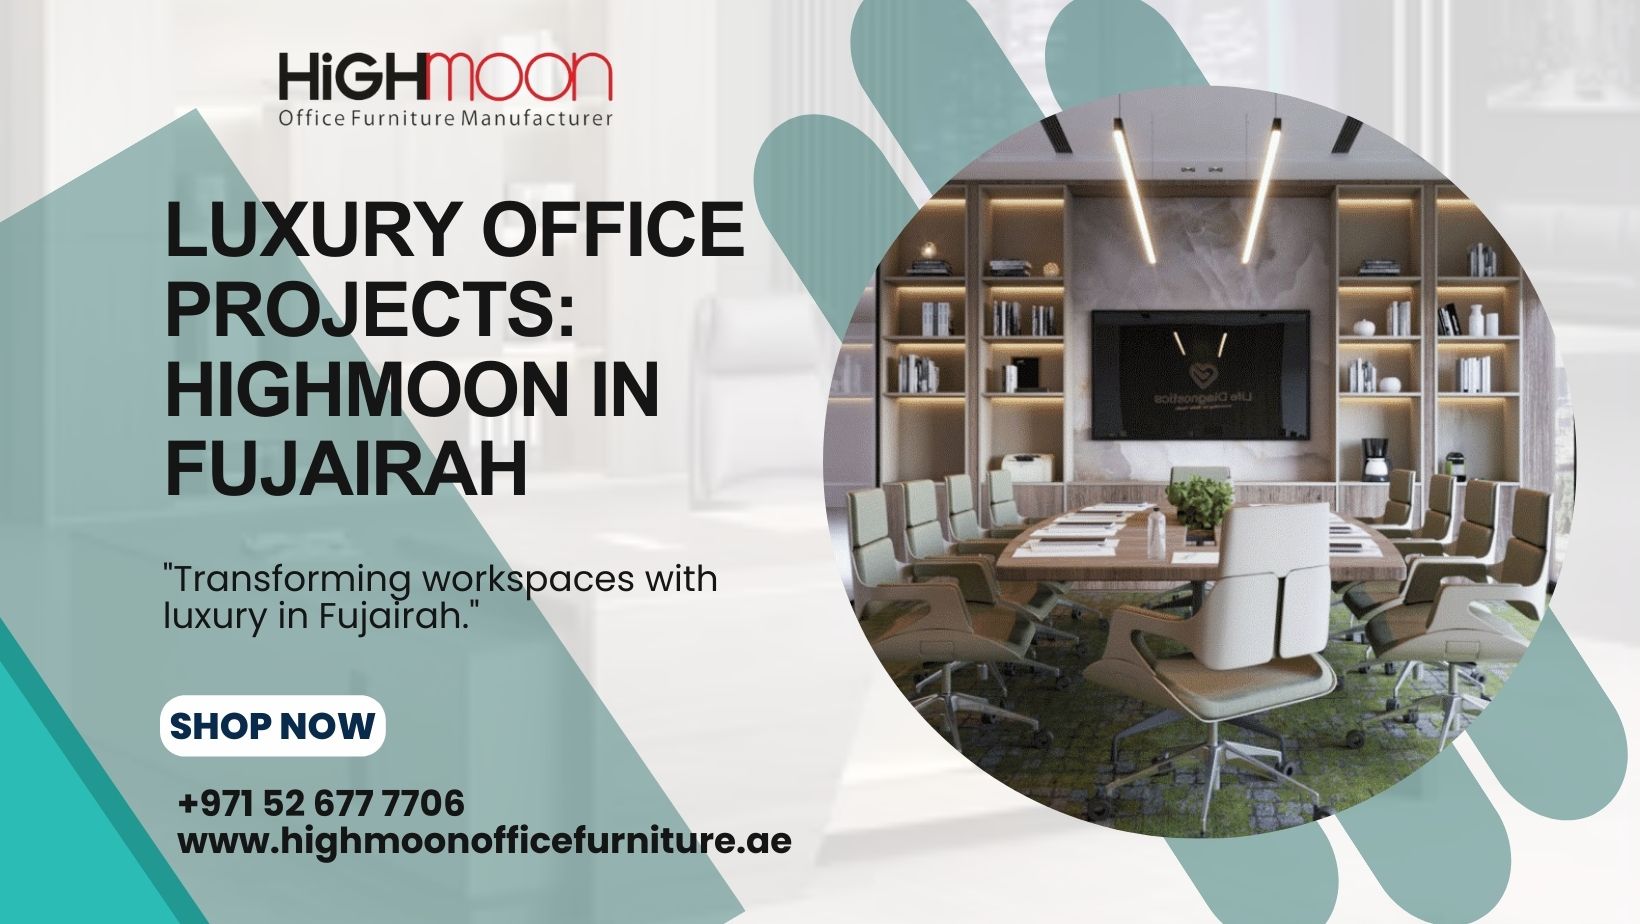 Luxury office furniture project in Fujairah